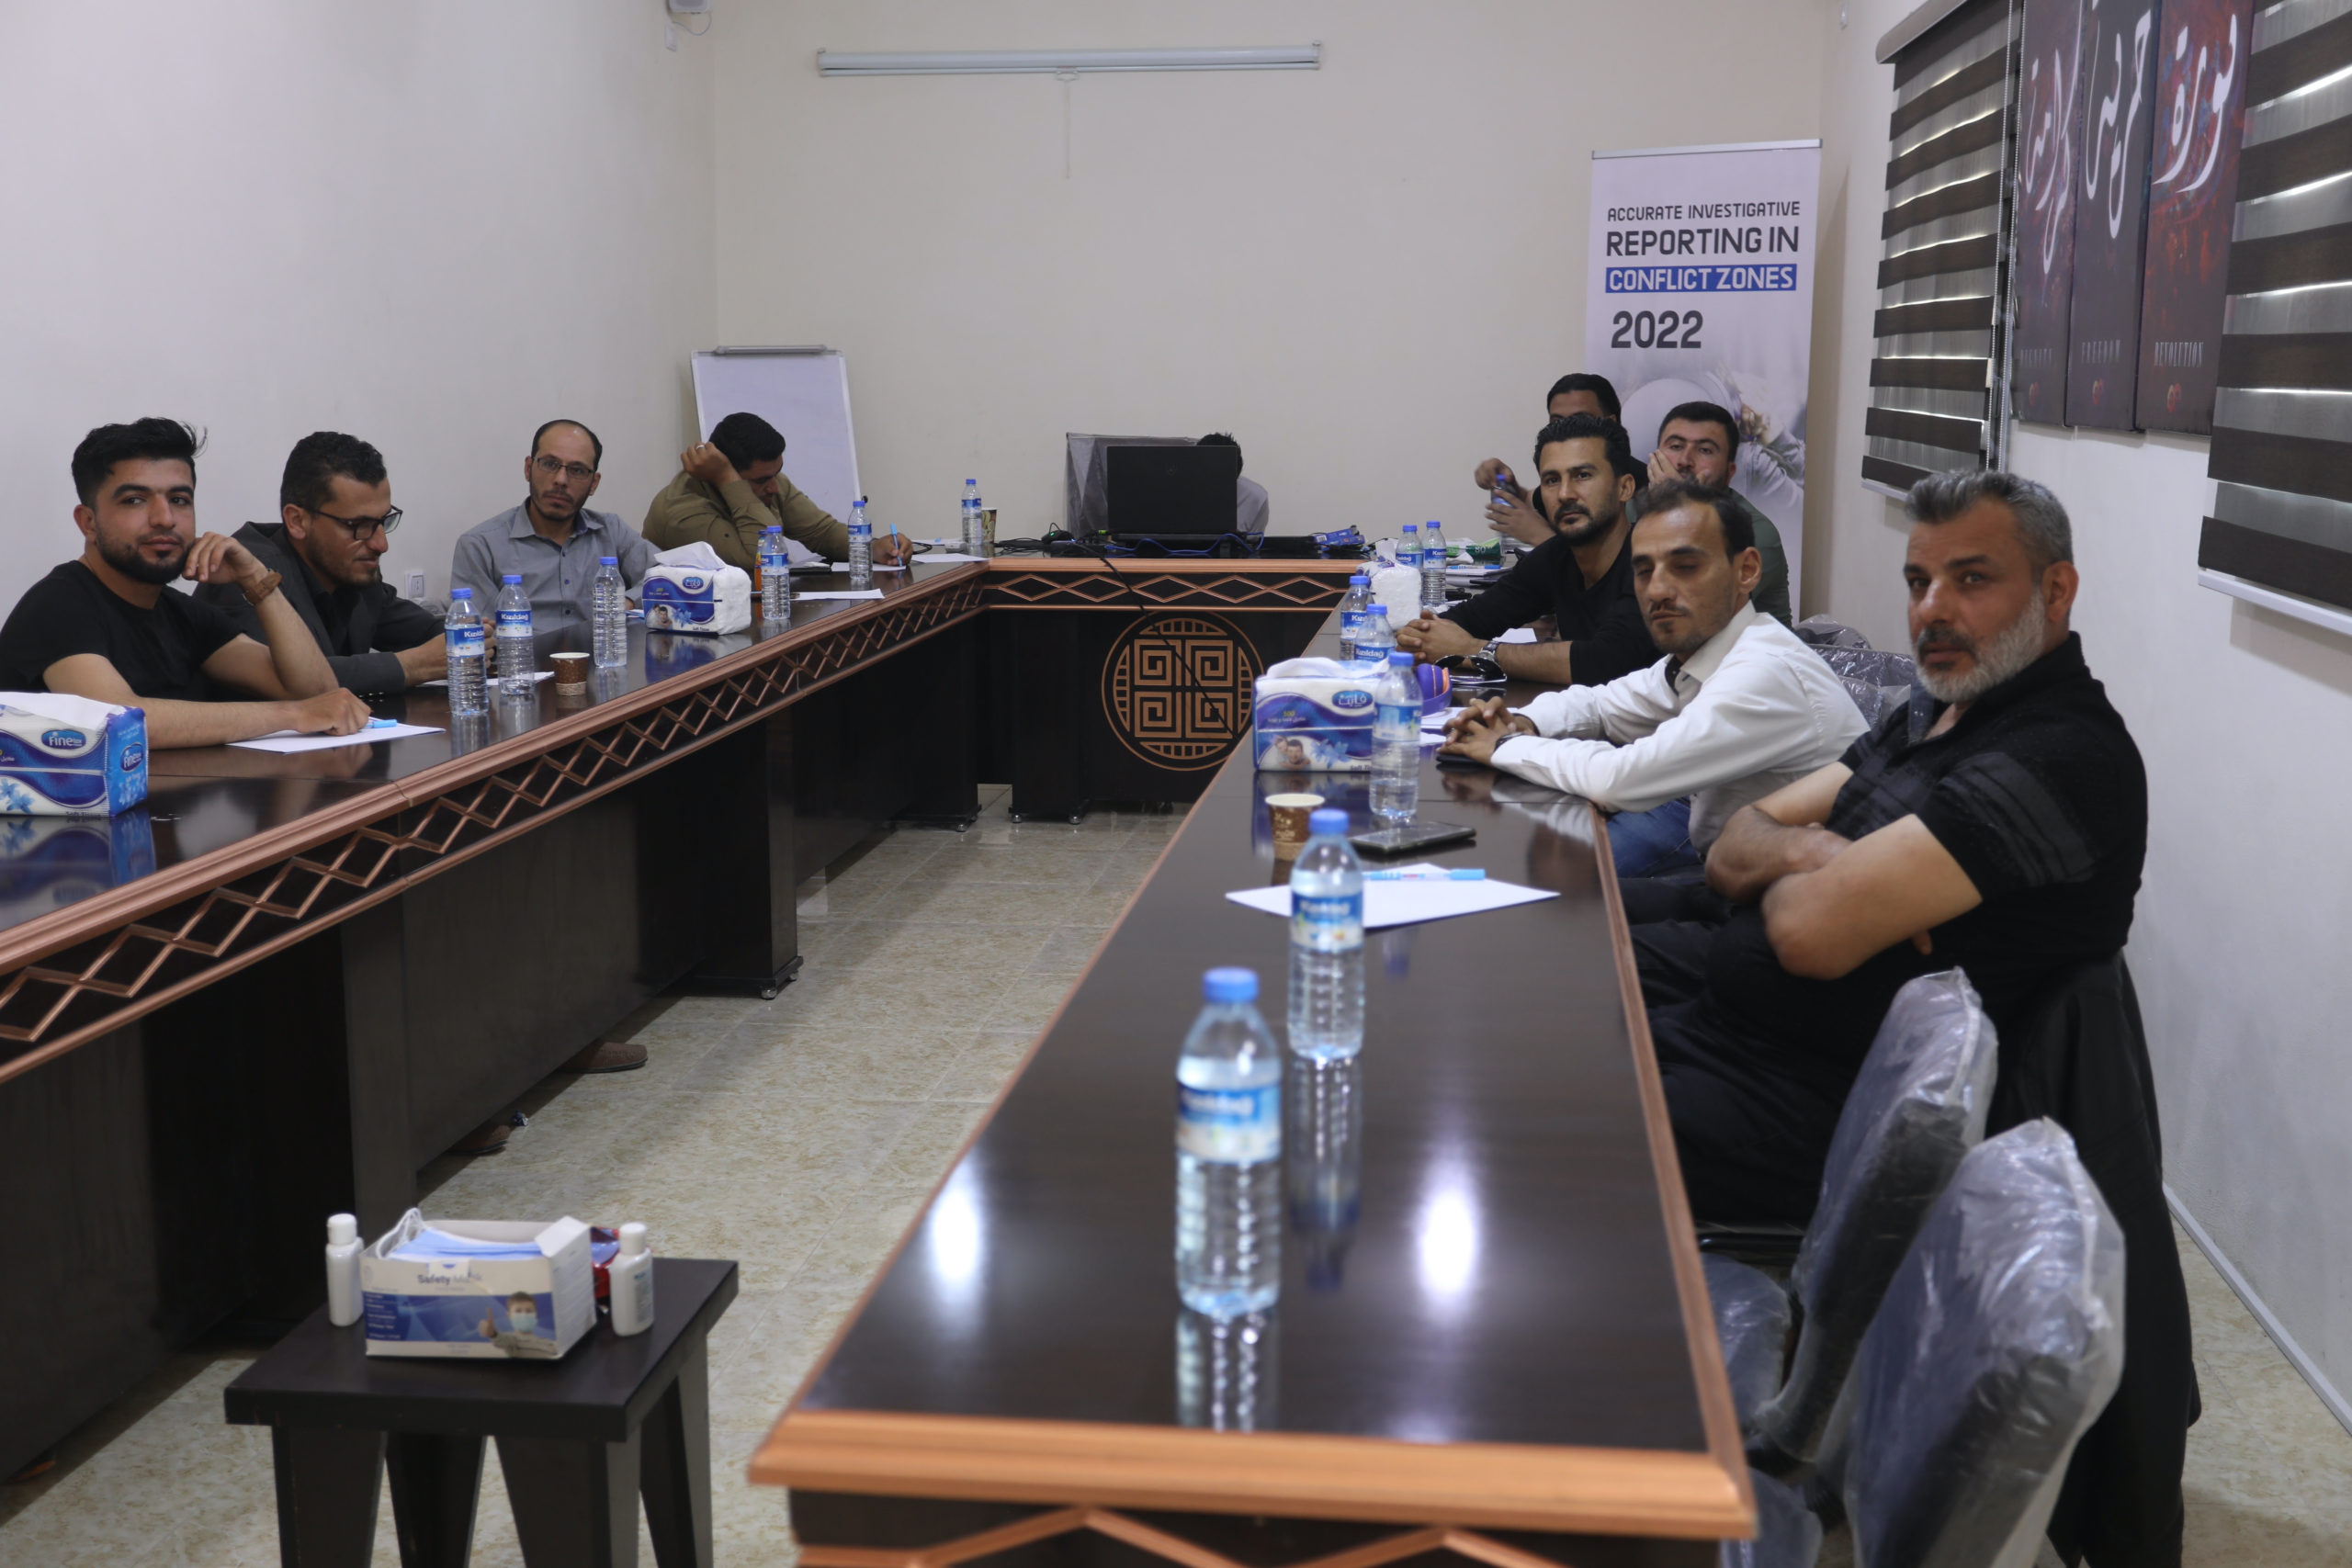 Training about Accurate investigative reporting in northern Syria